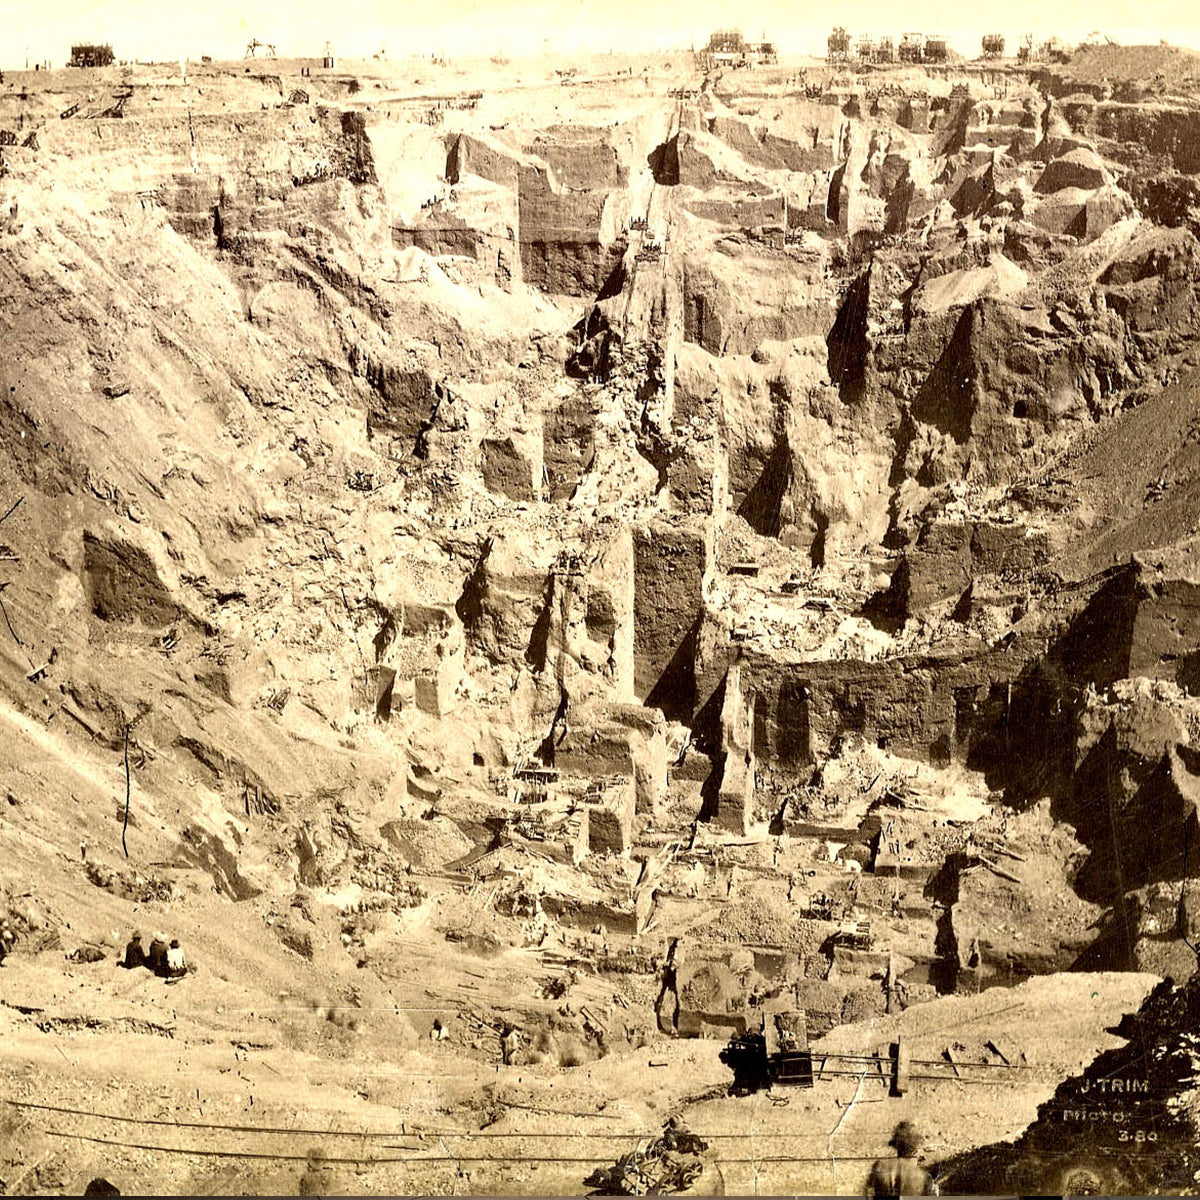 Historical Photograph Inside the Kimbelry Mine in South Africa